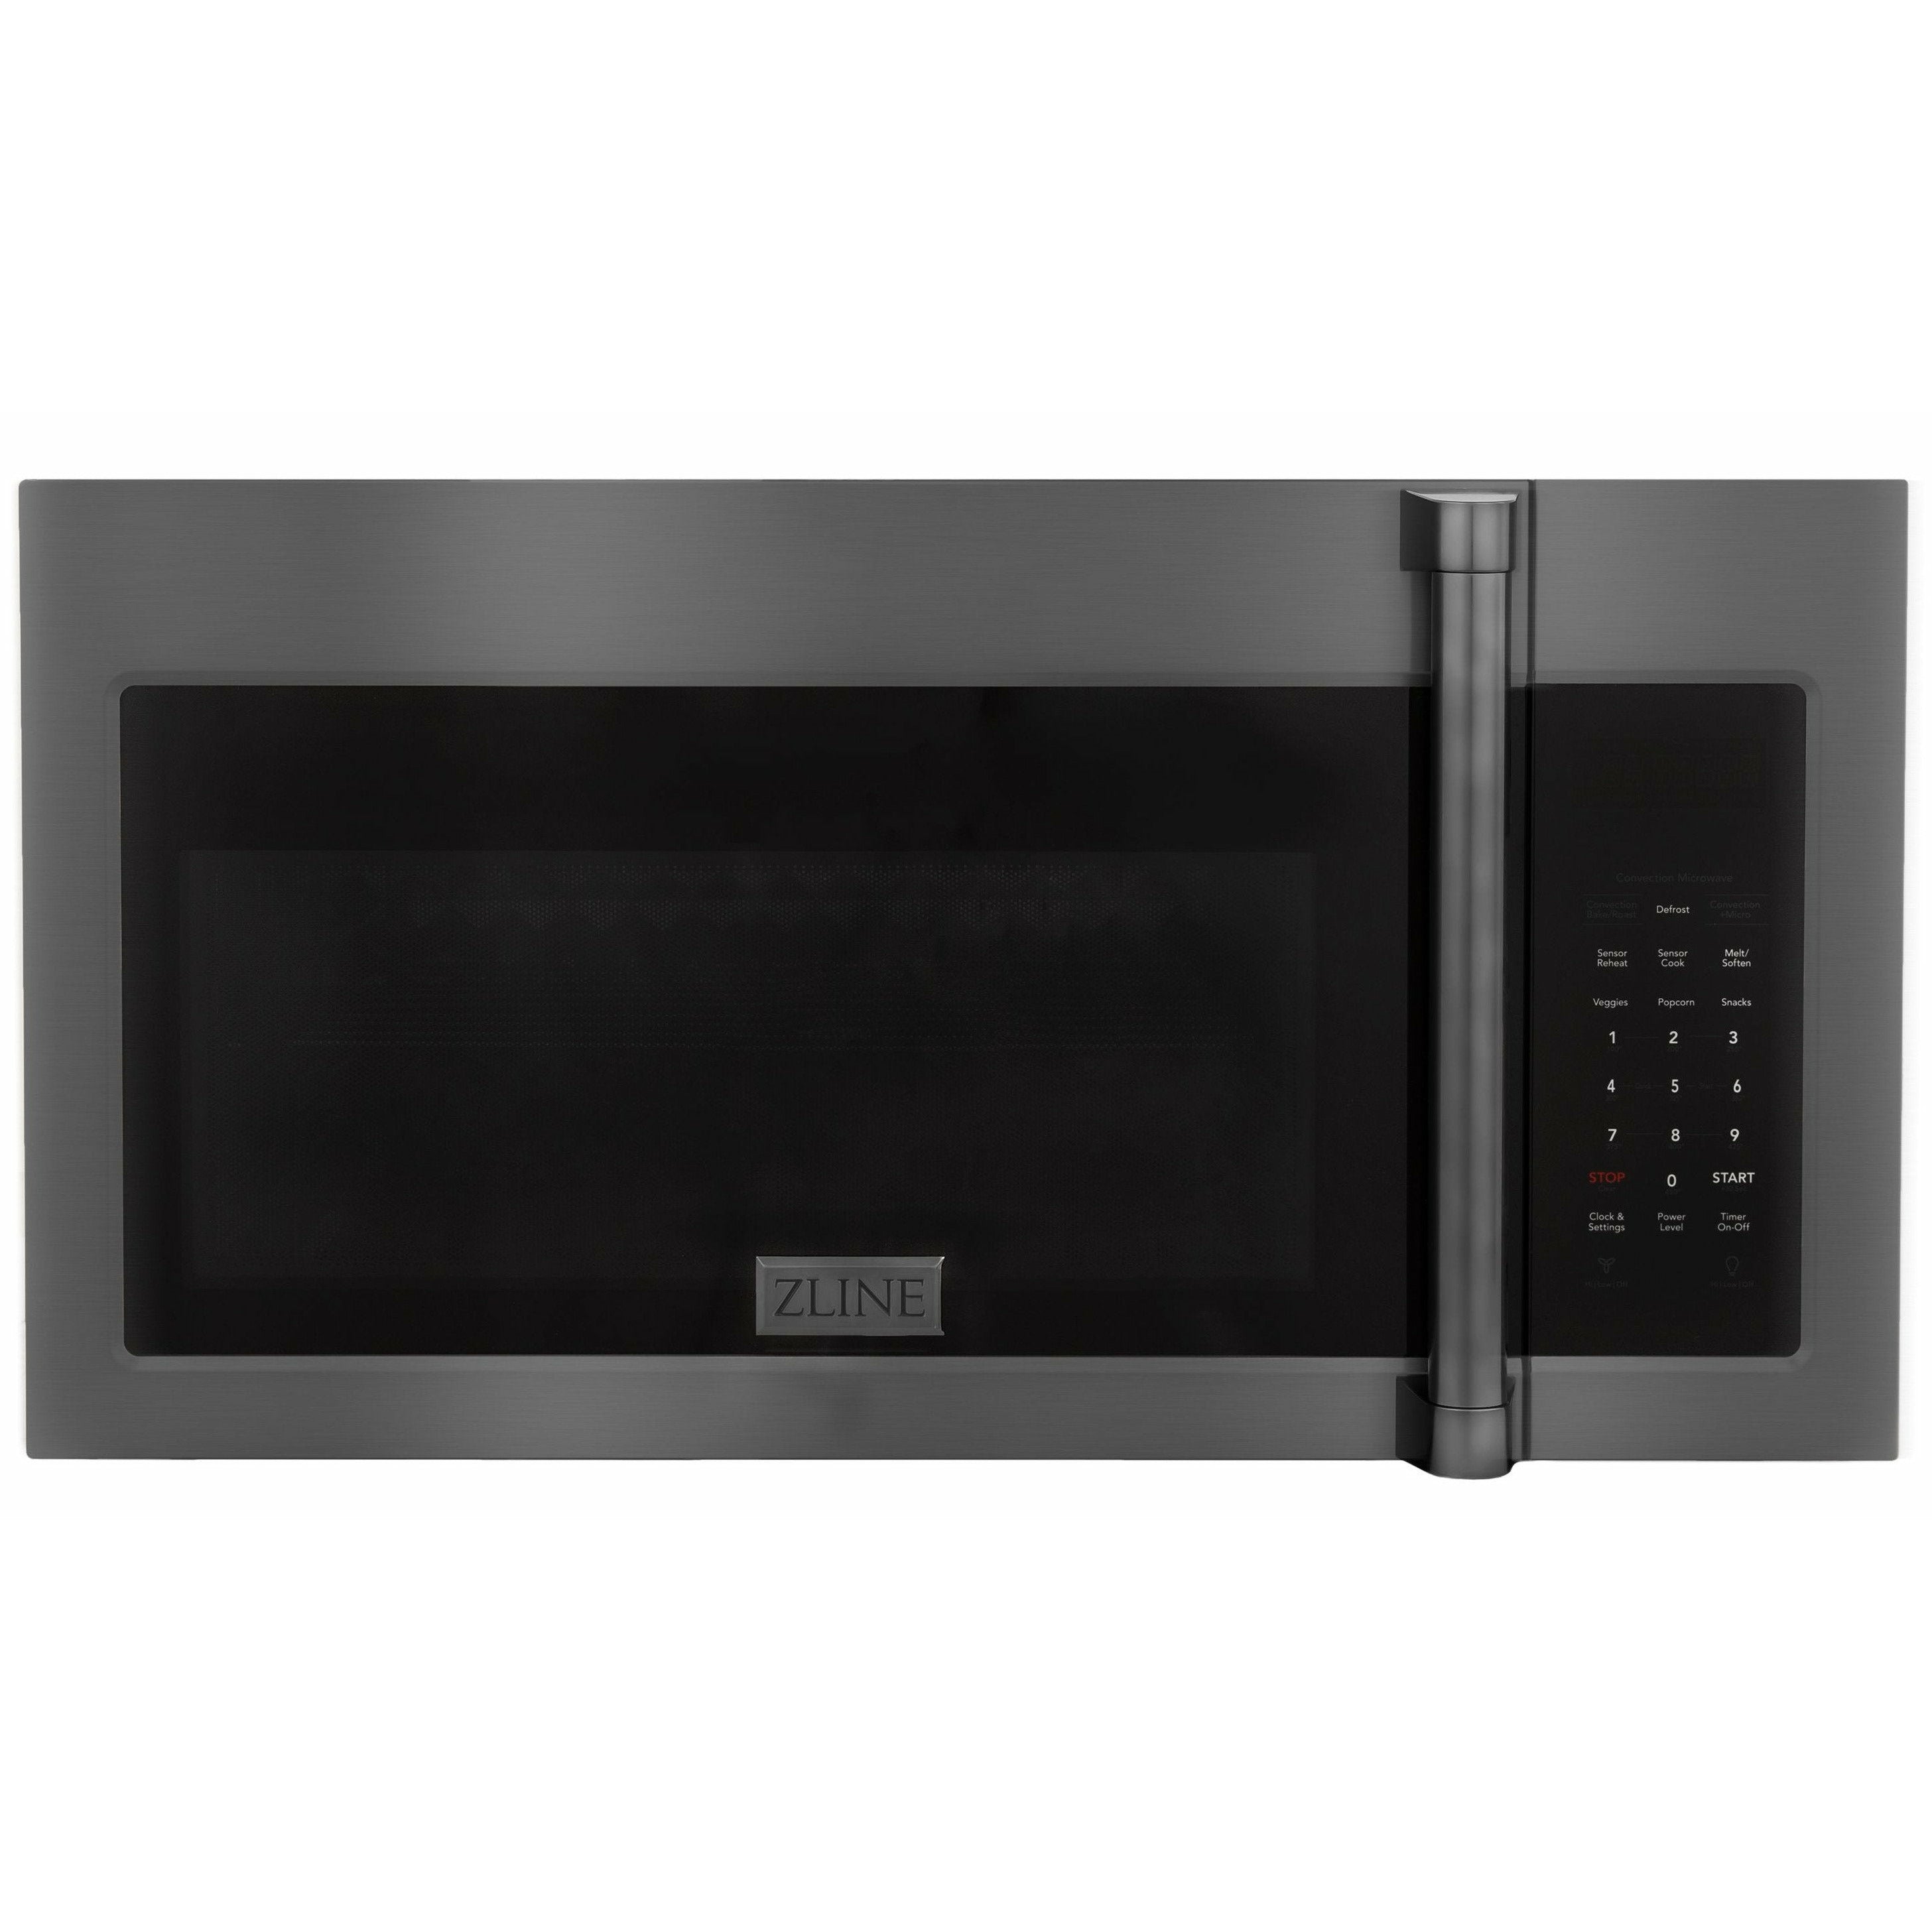 ZLINE Over the Range Convection Microwave Oven in Black Stainless Steel with Traditional Handle and Sensor Cooking, MWO-OTR-H-30-BS